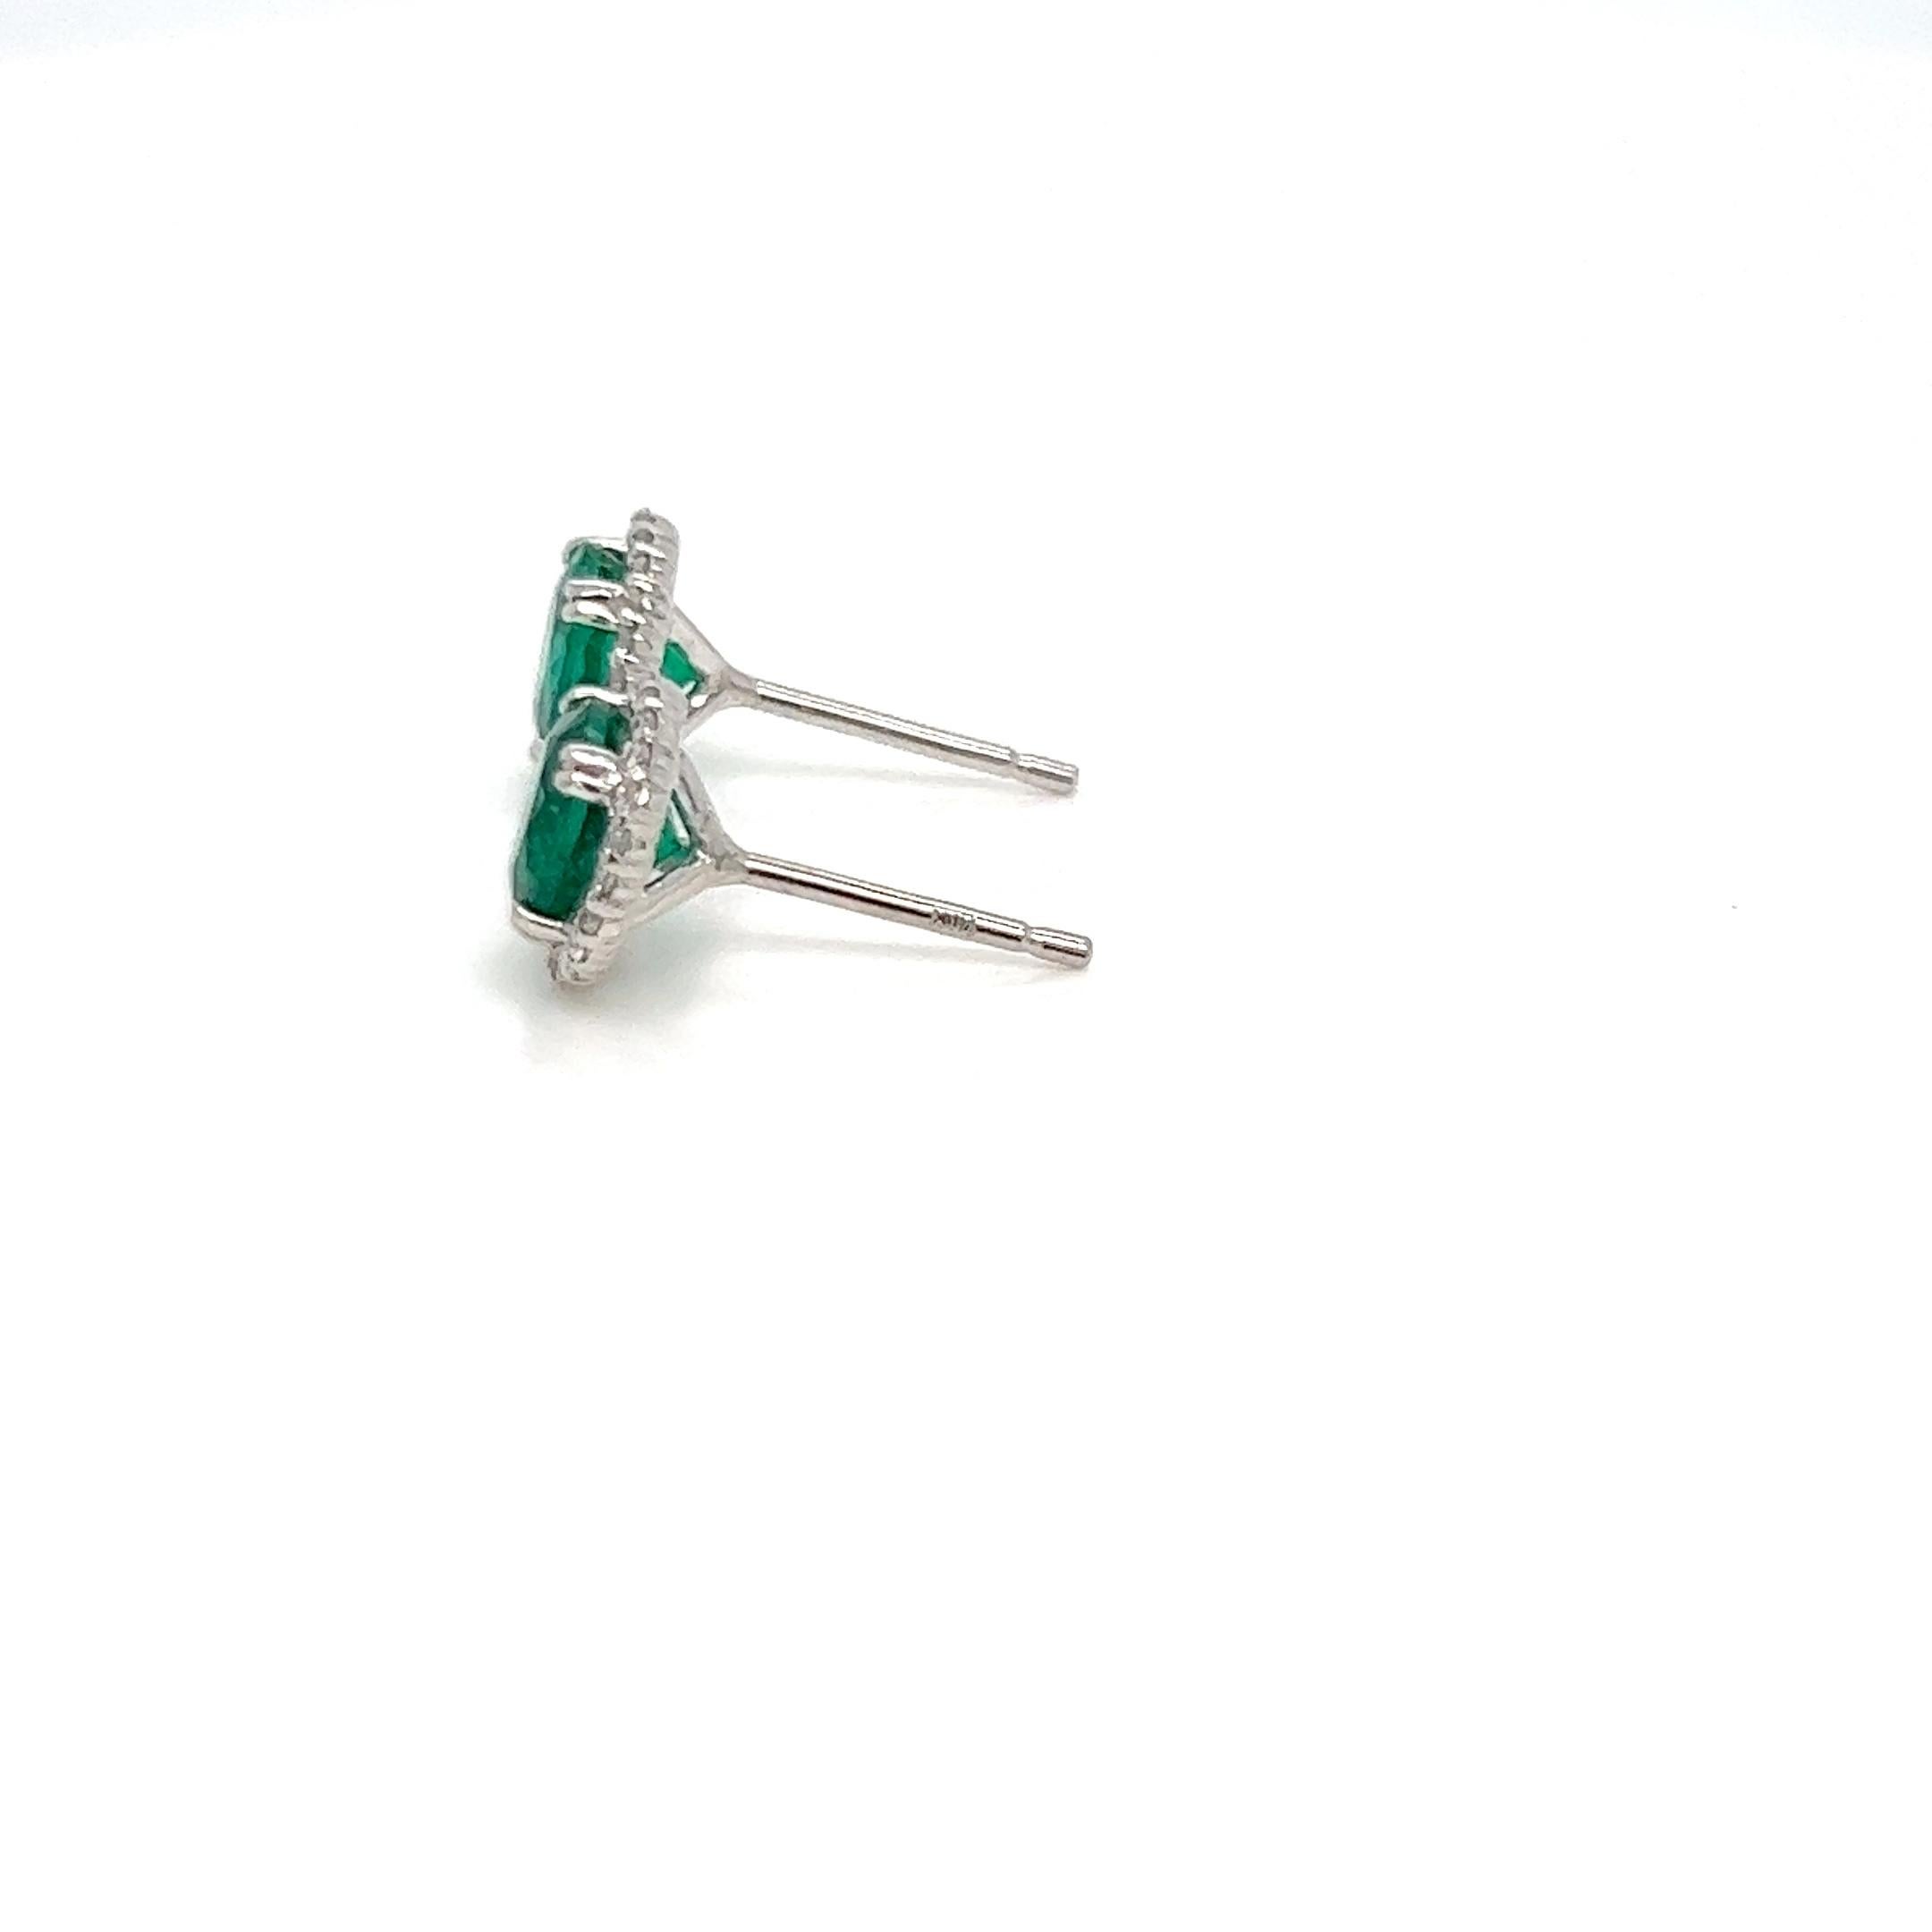 Dwell into this beautiful 1.67 carats emerald and diamond stud earrings made in 18k white gold. Emeralds are one of the most precious gemstones on earth and rare to find so extreme care is necessary. The emeralds and diamonds used are hand picked